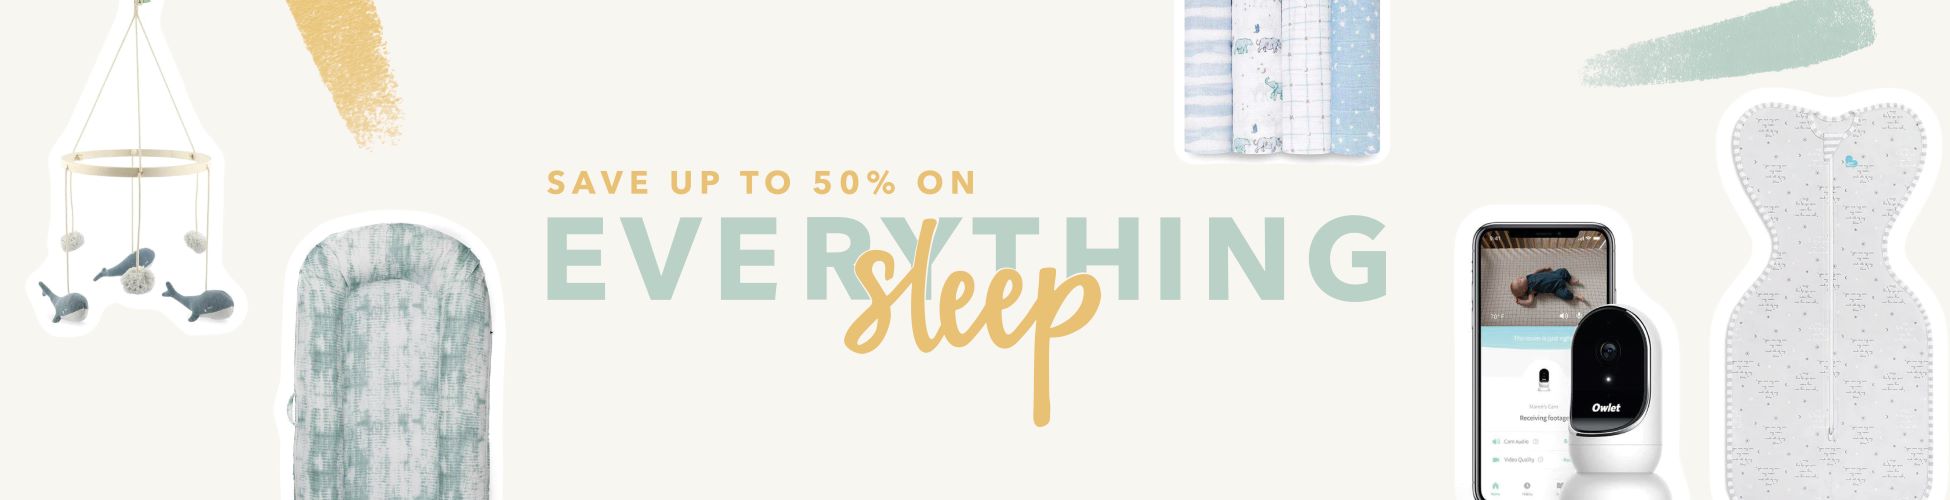 sleep-category-banner-1950x500 | Natural Baby Shower